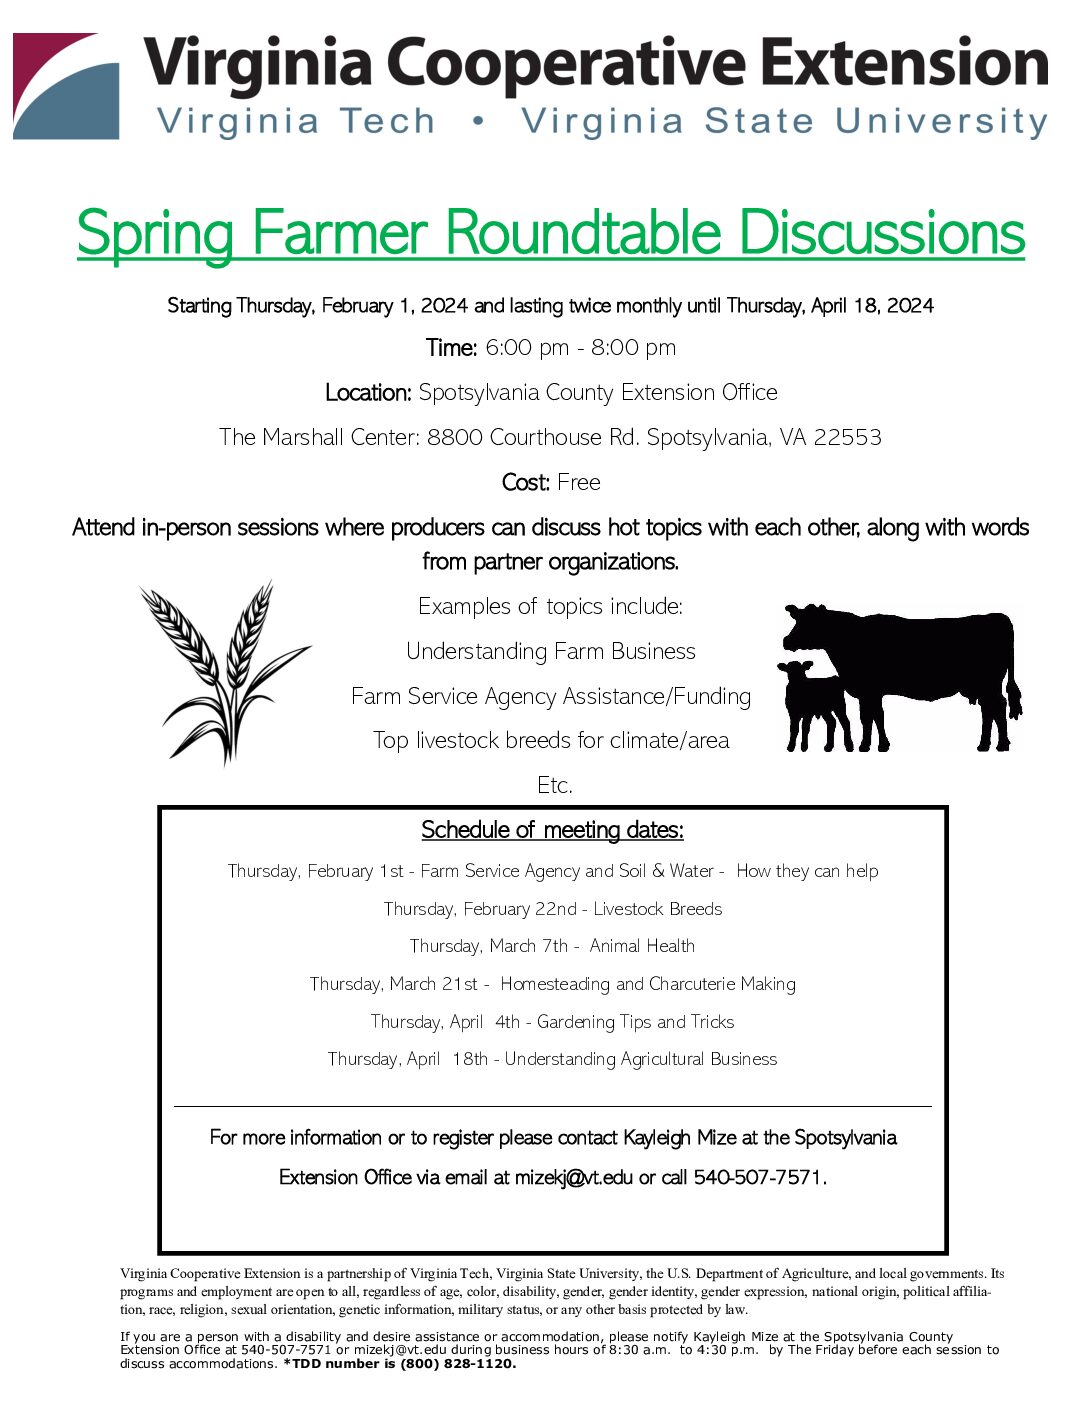 Spring Farmer Roundtable Discussions